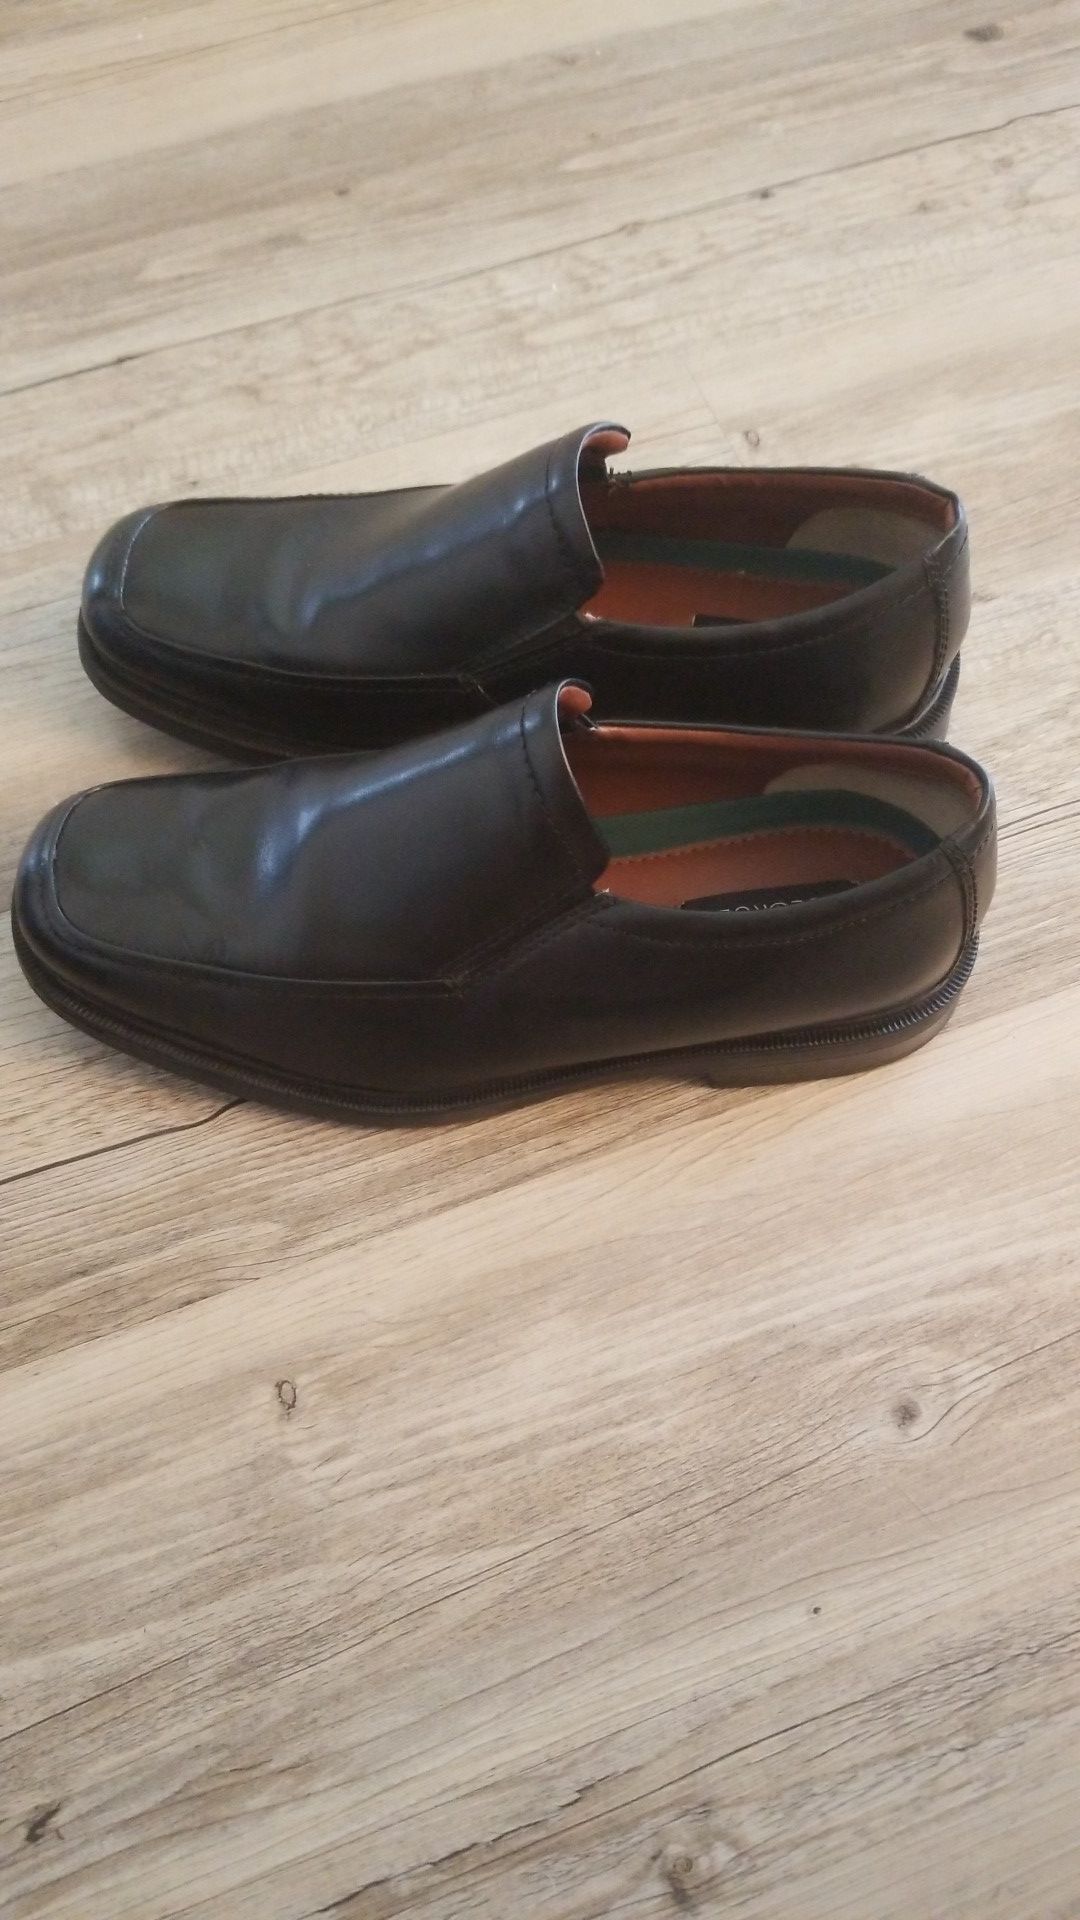 Mens shoes never used size 11